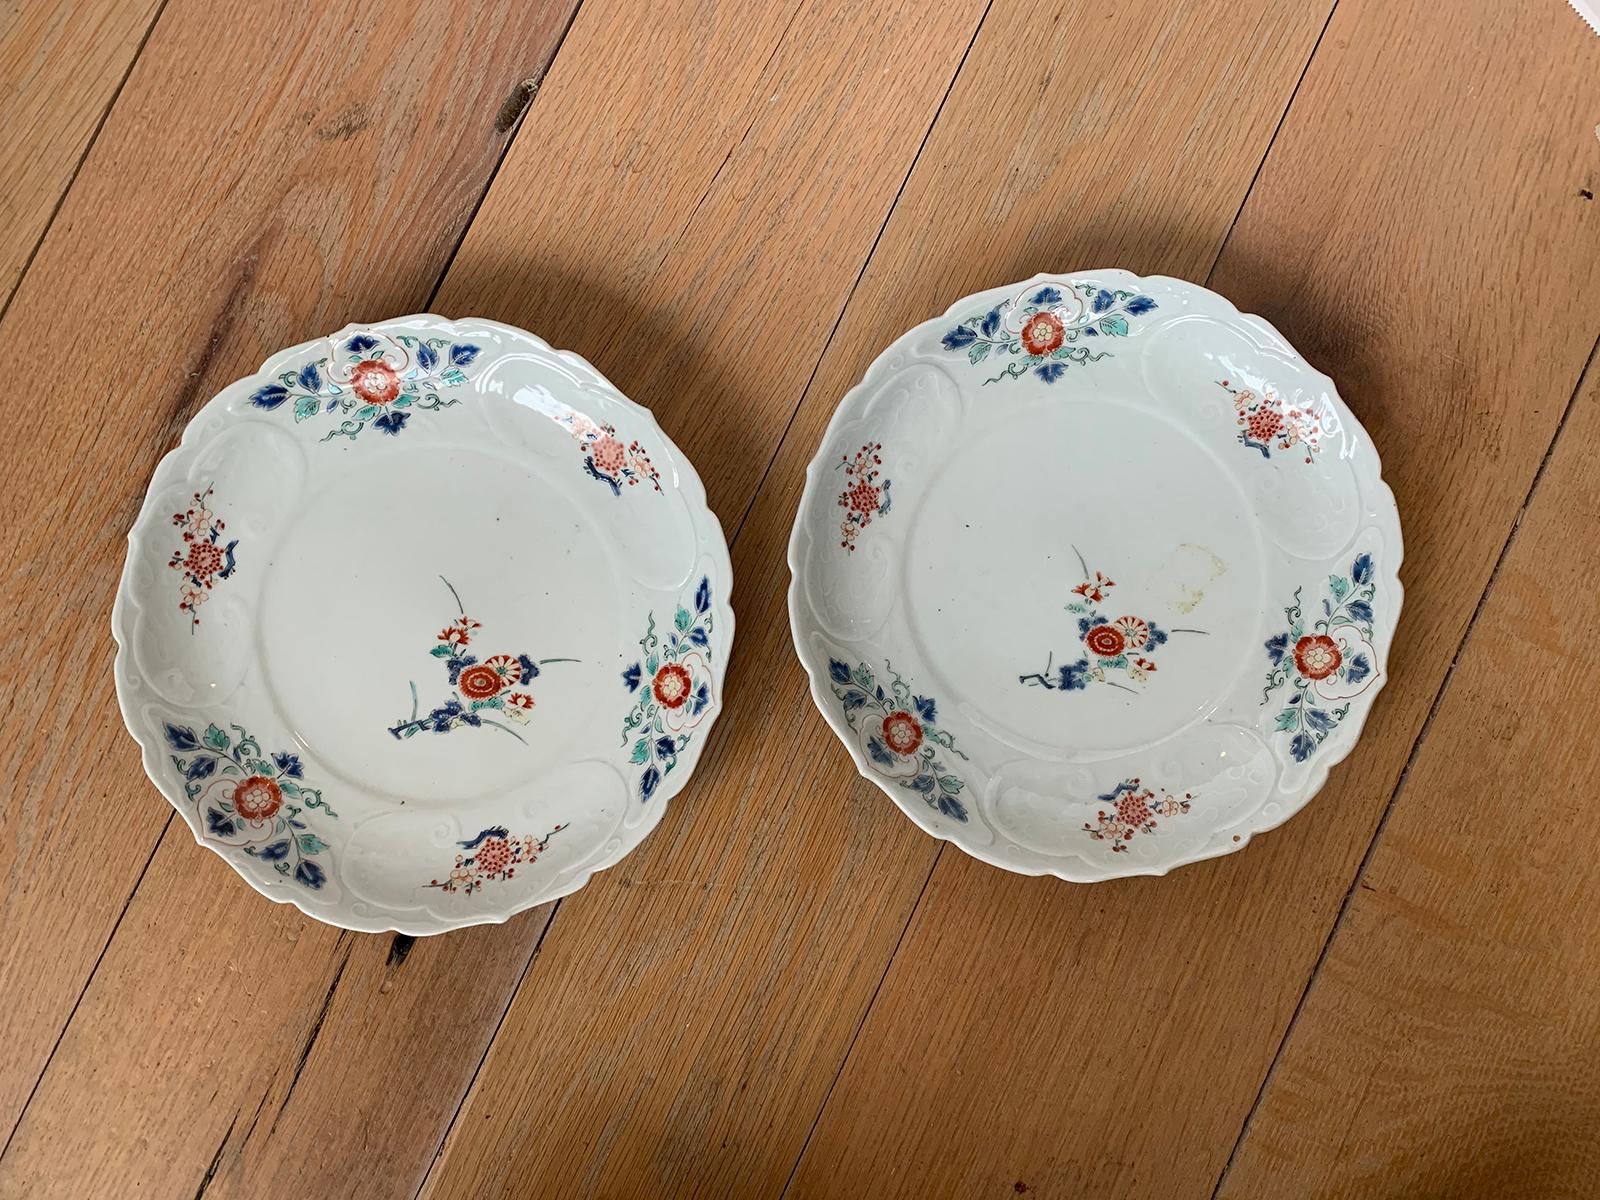 Pair of 19th century floral round porcelain plates with scalloped edge, unmarked.